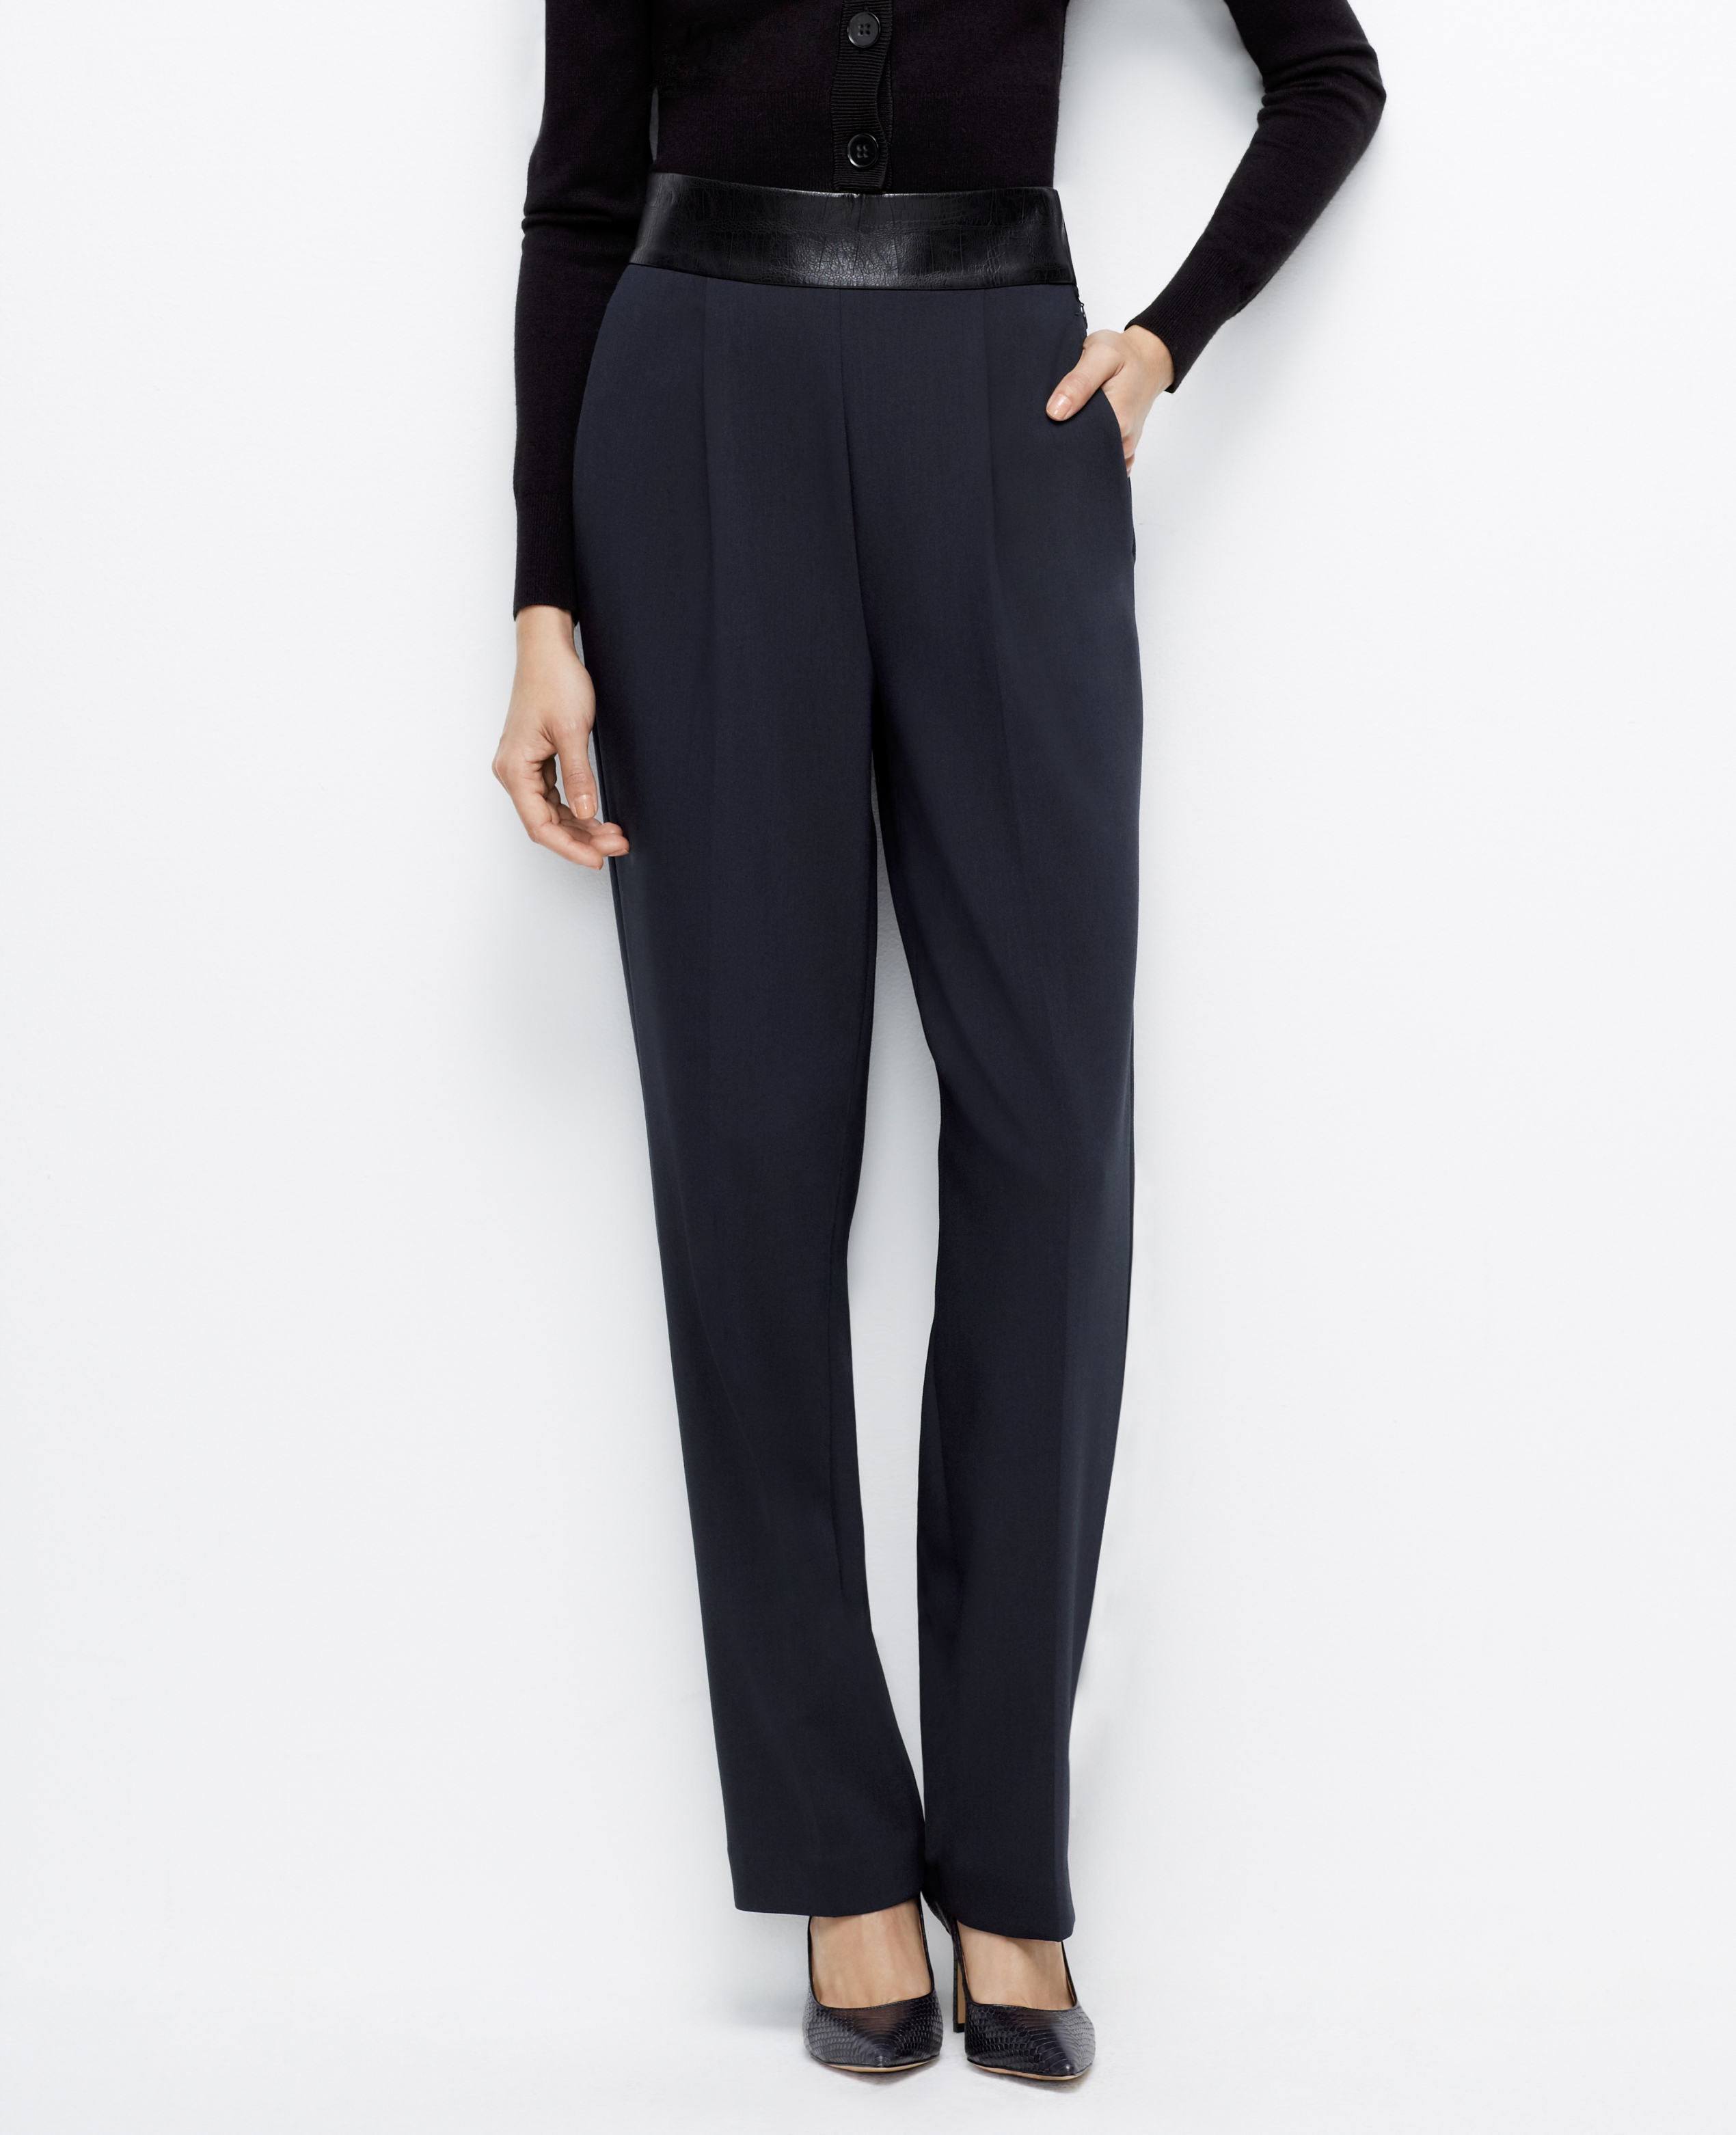 Lyst - Ann Taylor High Waisted Pants in Black